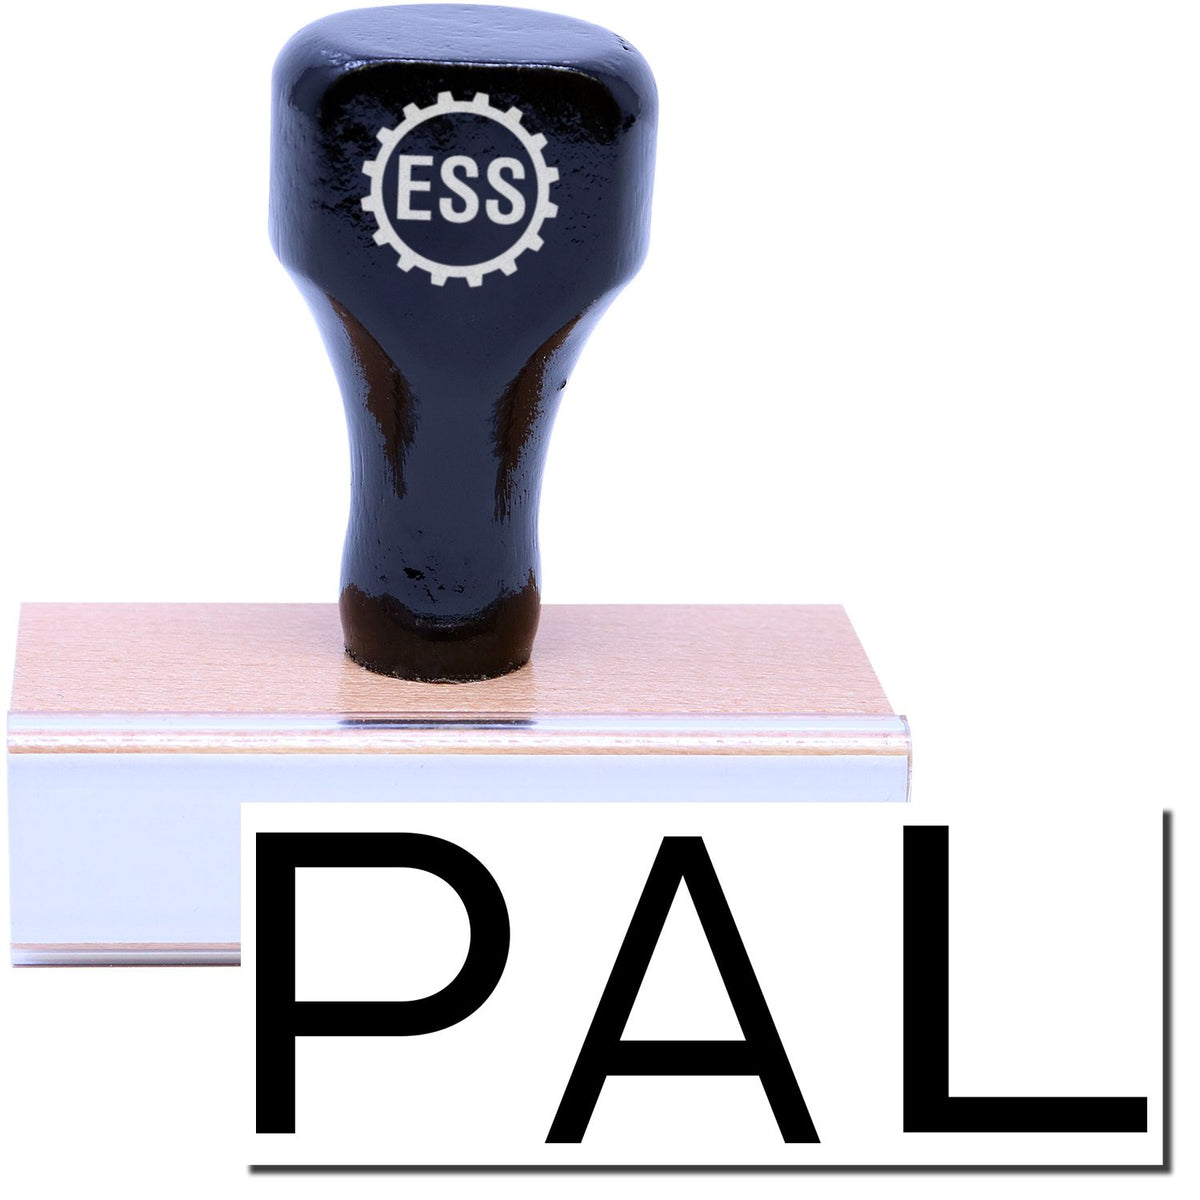 A stock office rubber stamp with a stamped image showing how the text &quot;PAL&quot; in a large font is displayed after stamping.